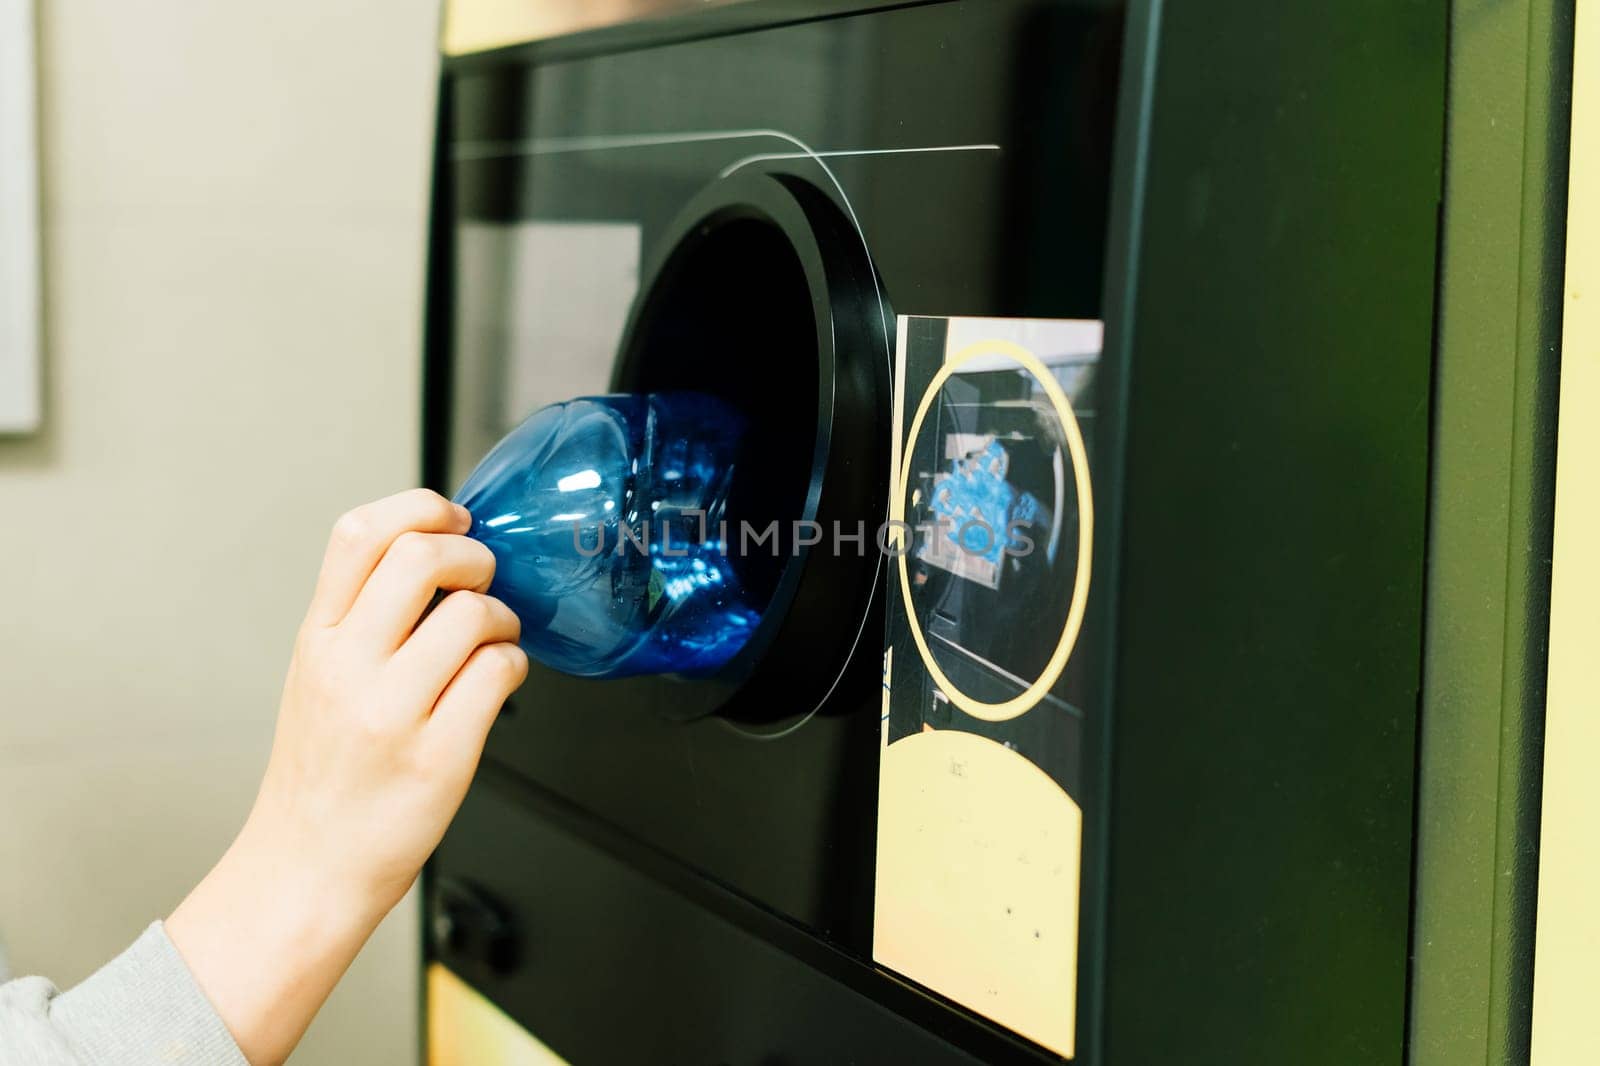 Reverse vending recycling machine that dispenses cash. Man hand puts plastic bottle to the machine by Zelenin